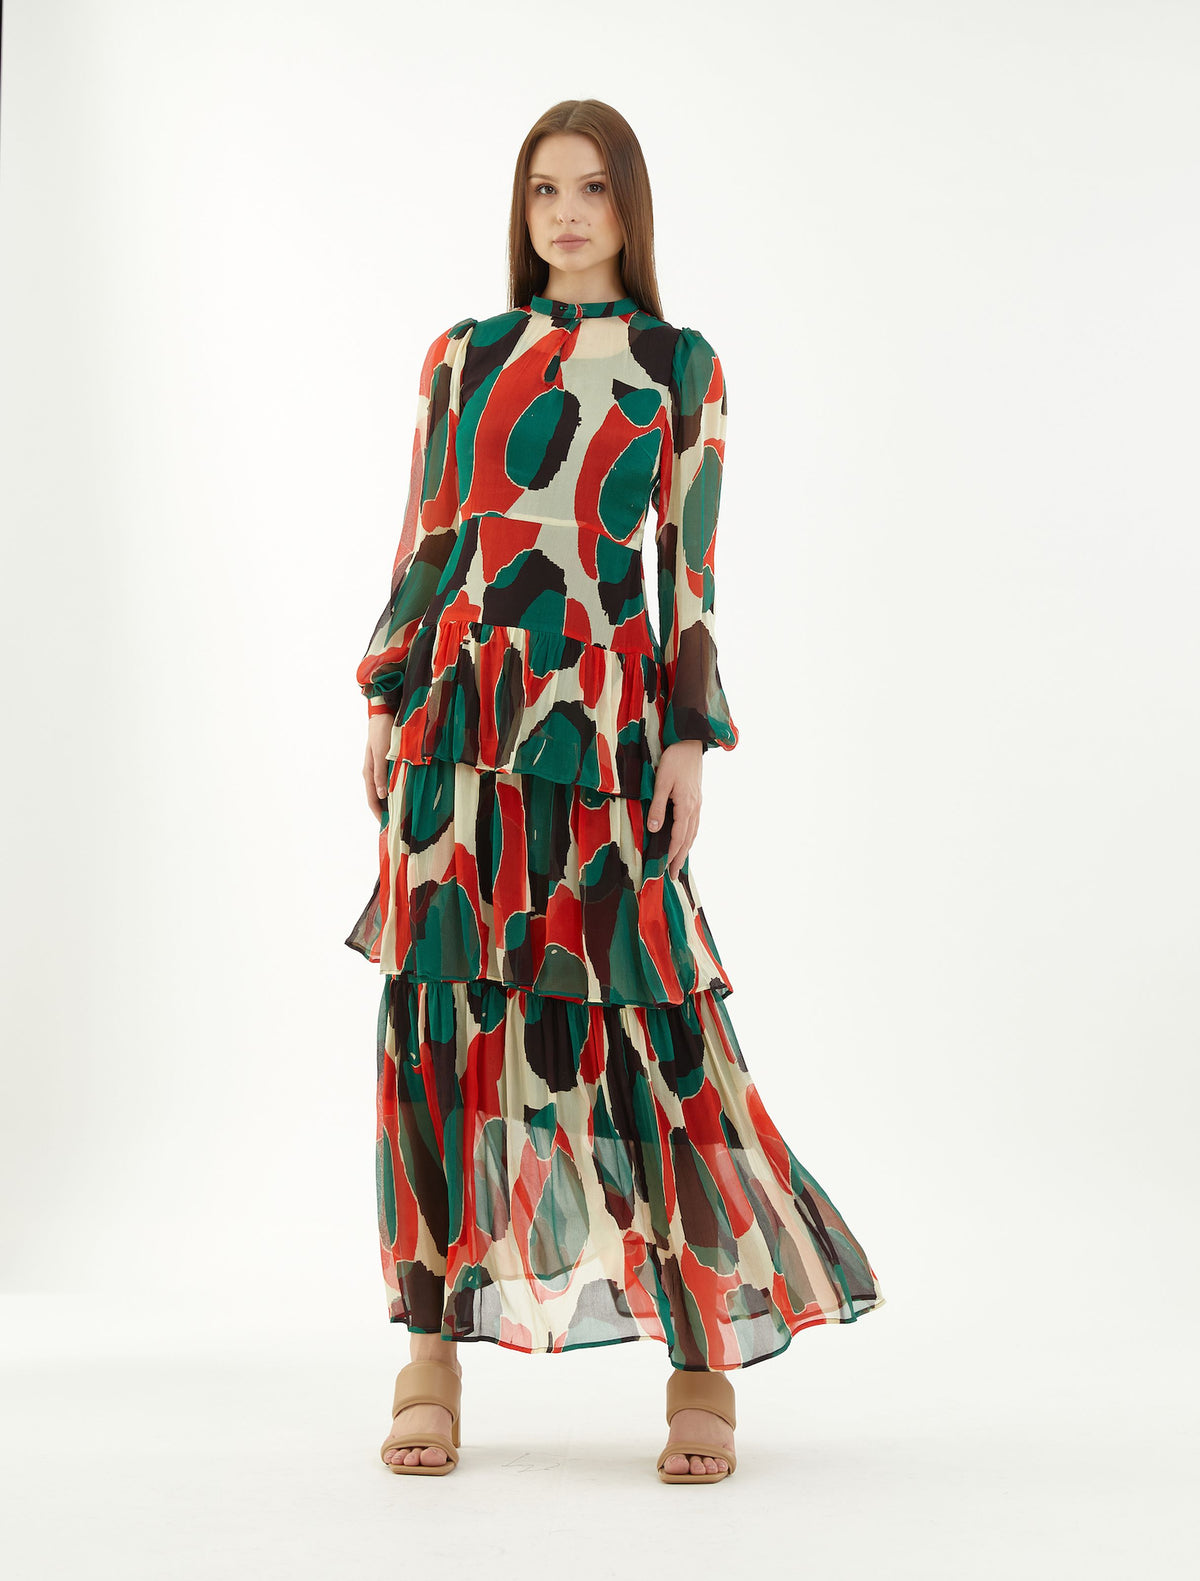 OFFWHITE, GREEN, BLACK AND RED ABSTRACT FRILL DRESS